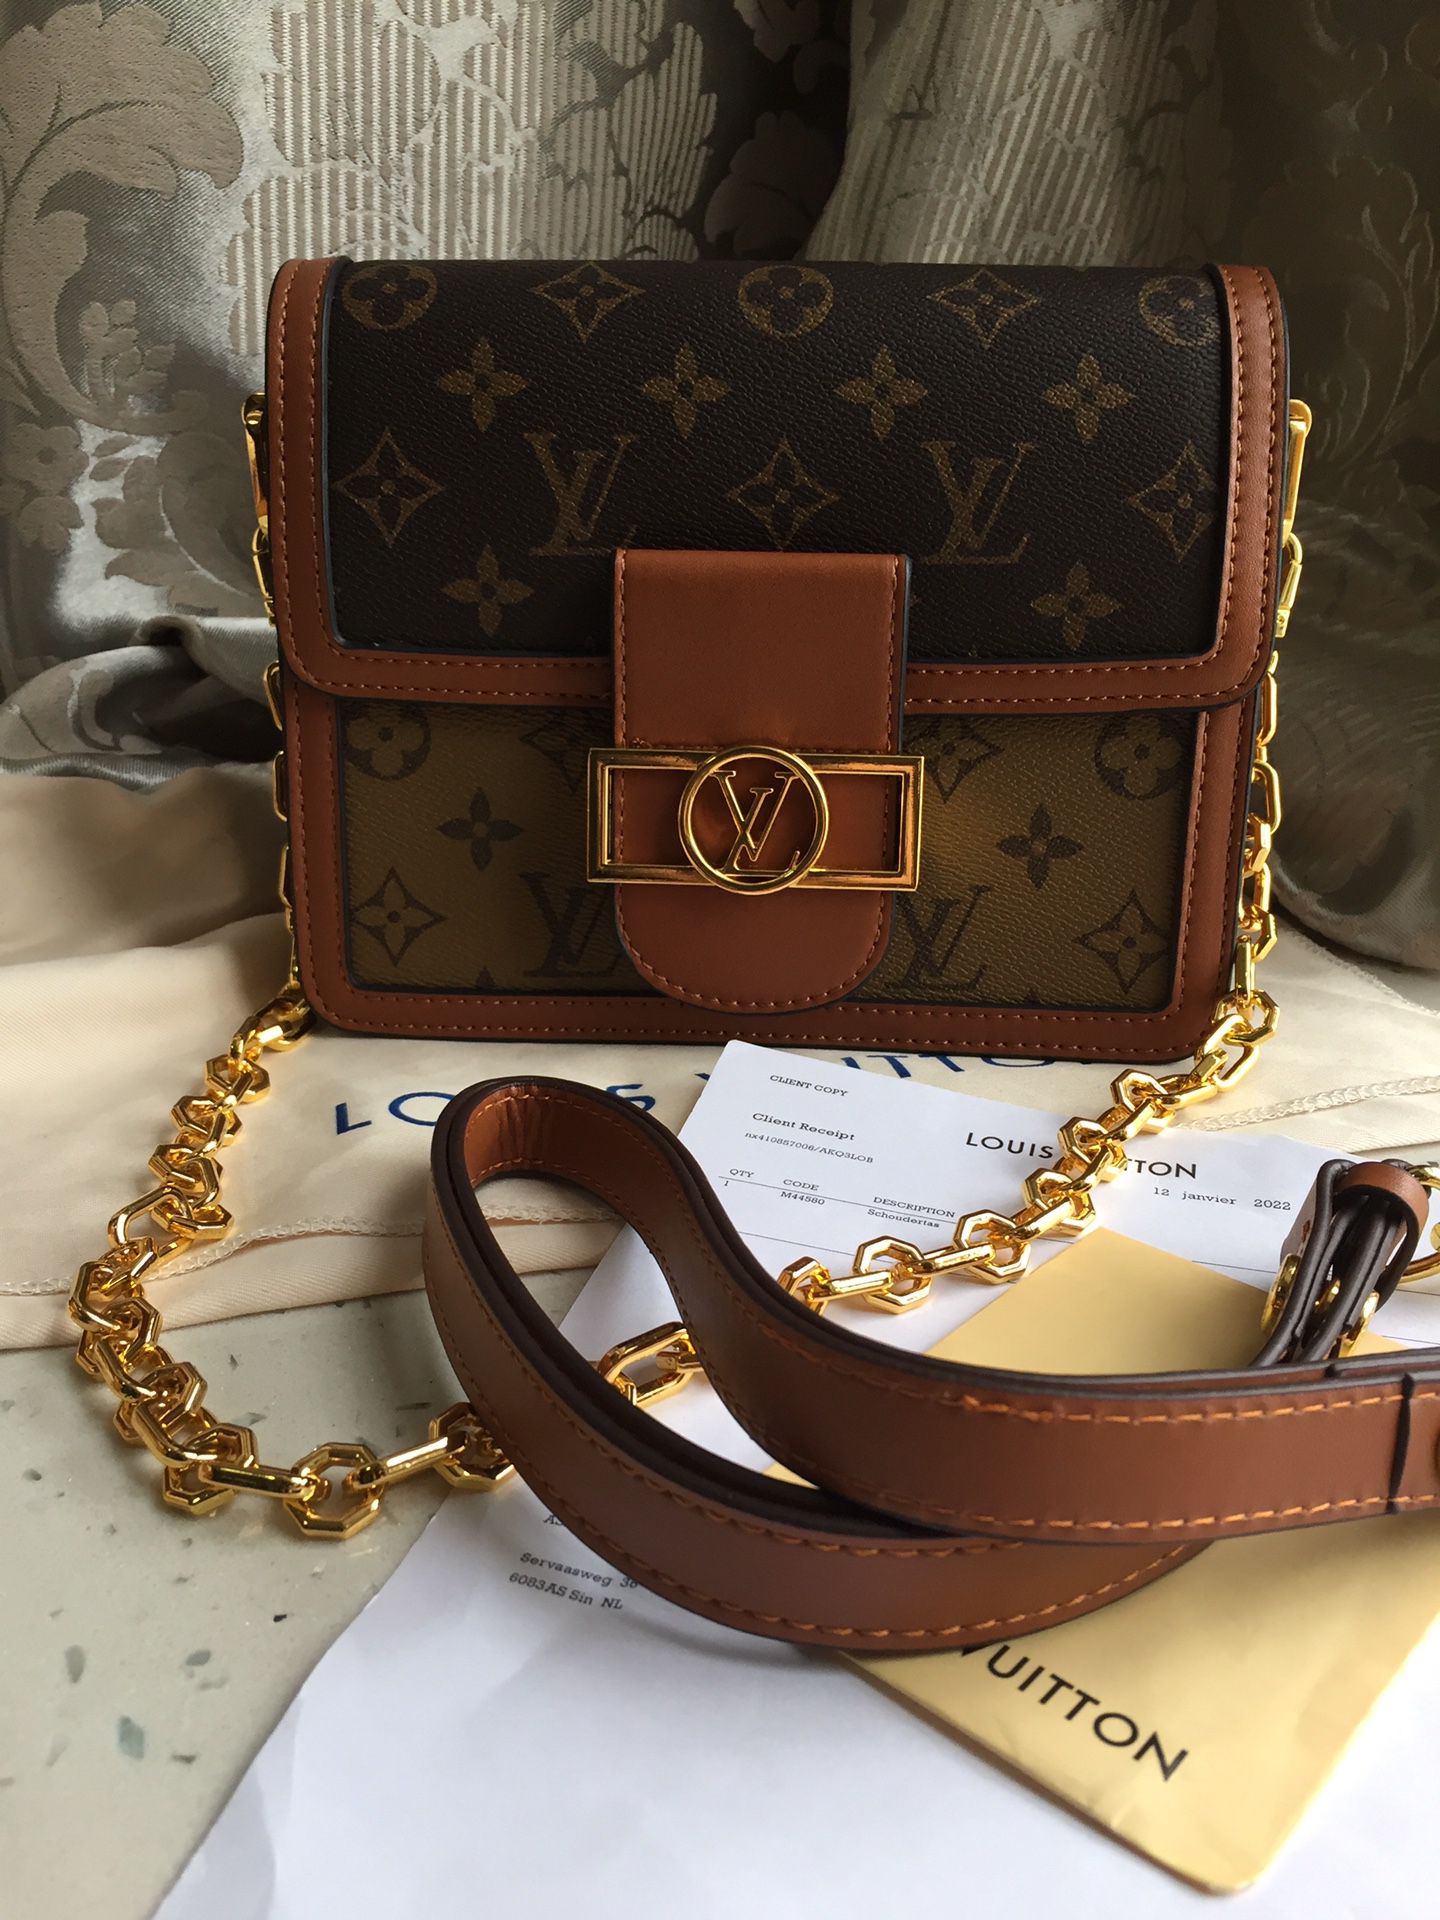 where to purchase authentic louis vuitton handbags